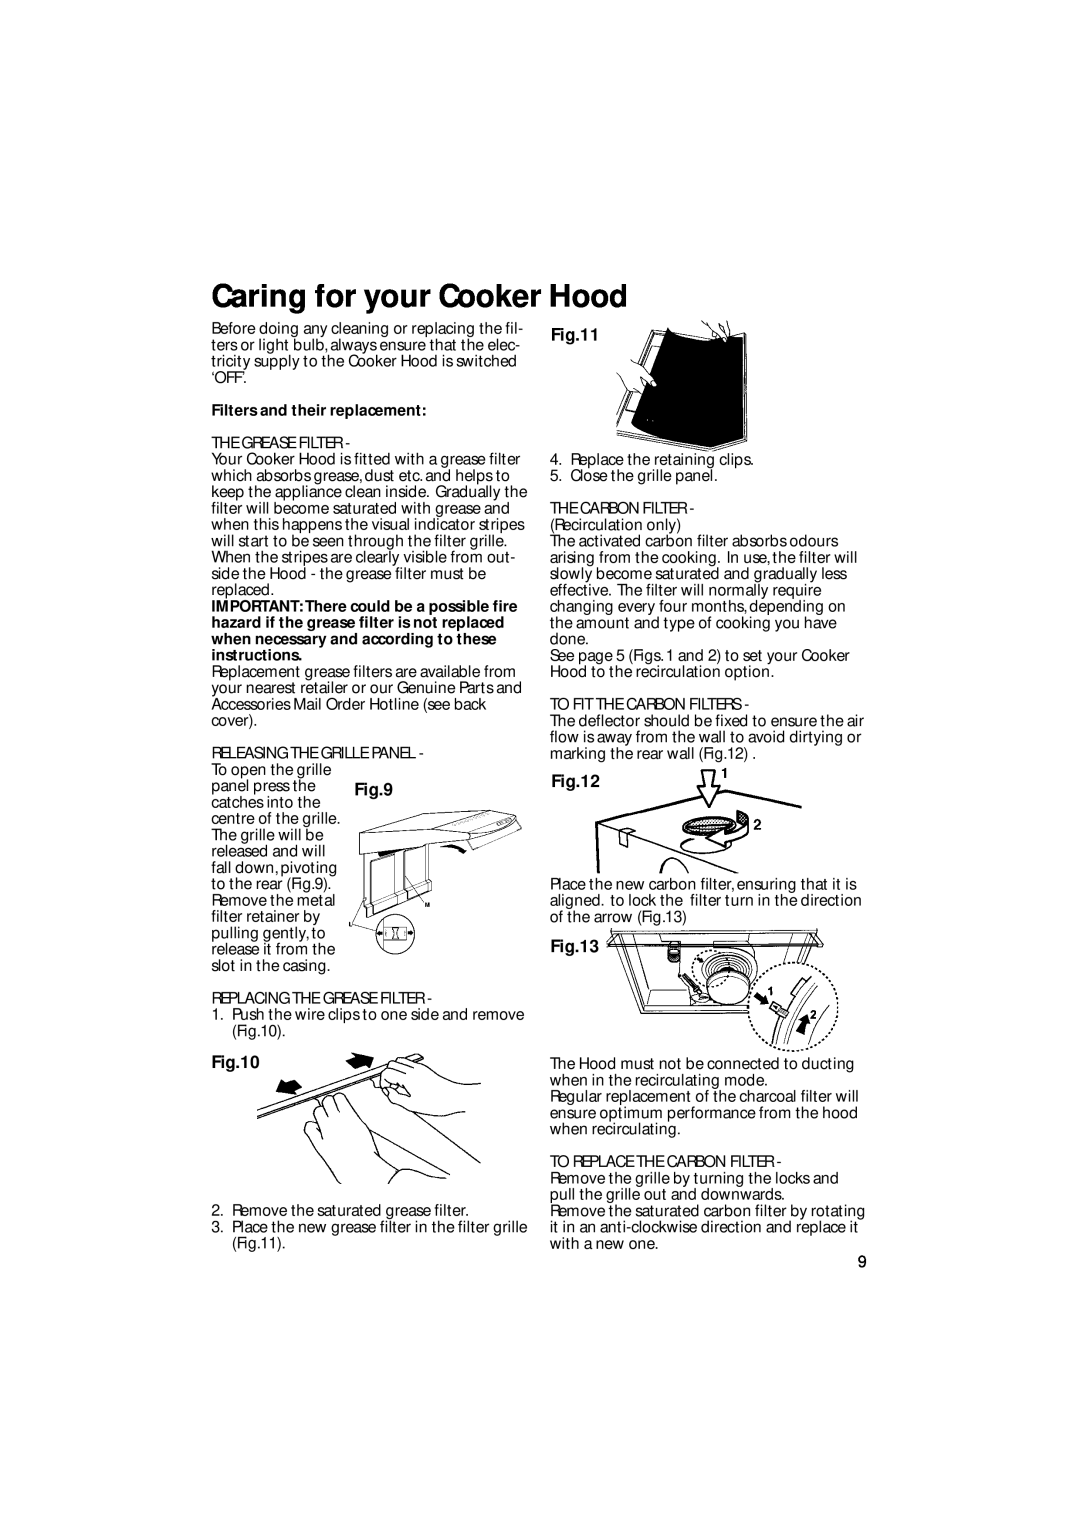 Creda CRV10 manual Caring for your Cooker Hood, Filters and their replacement 